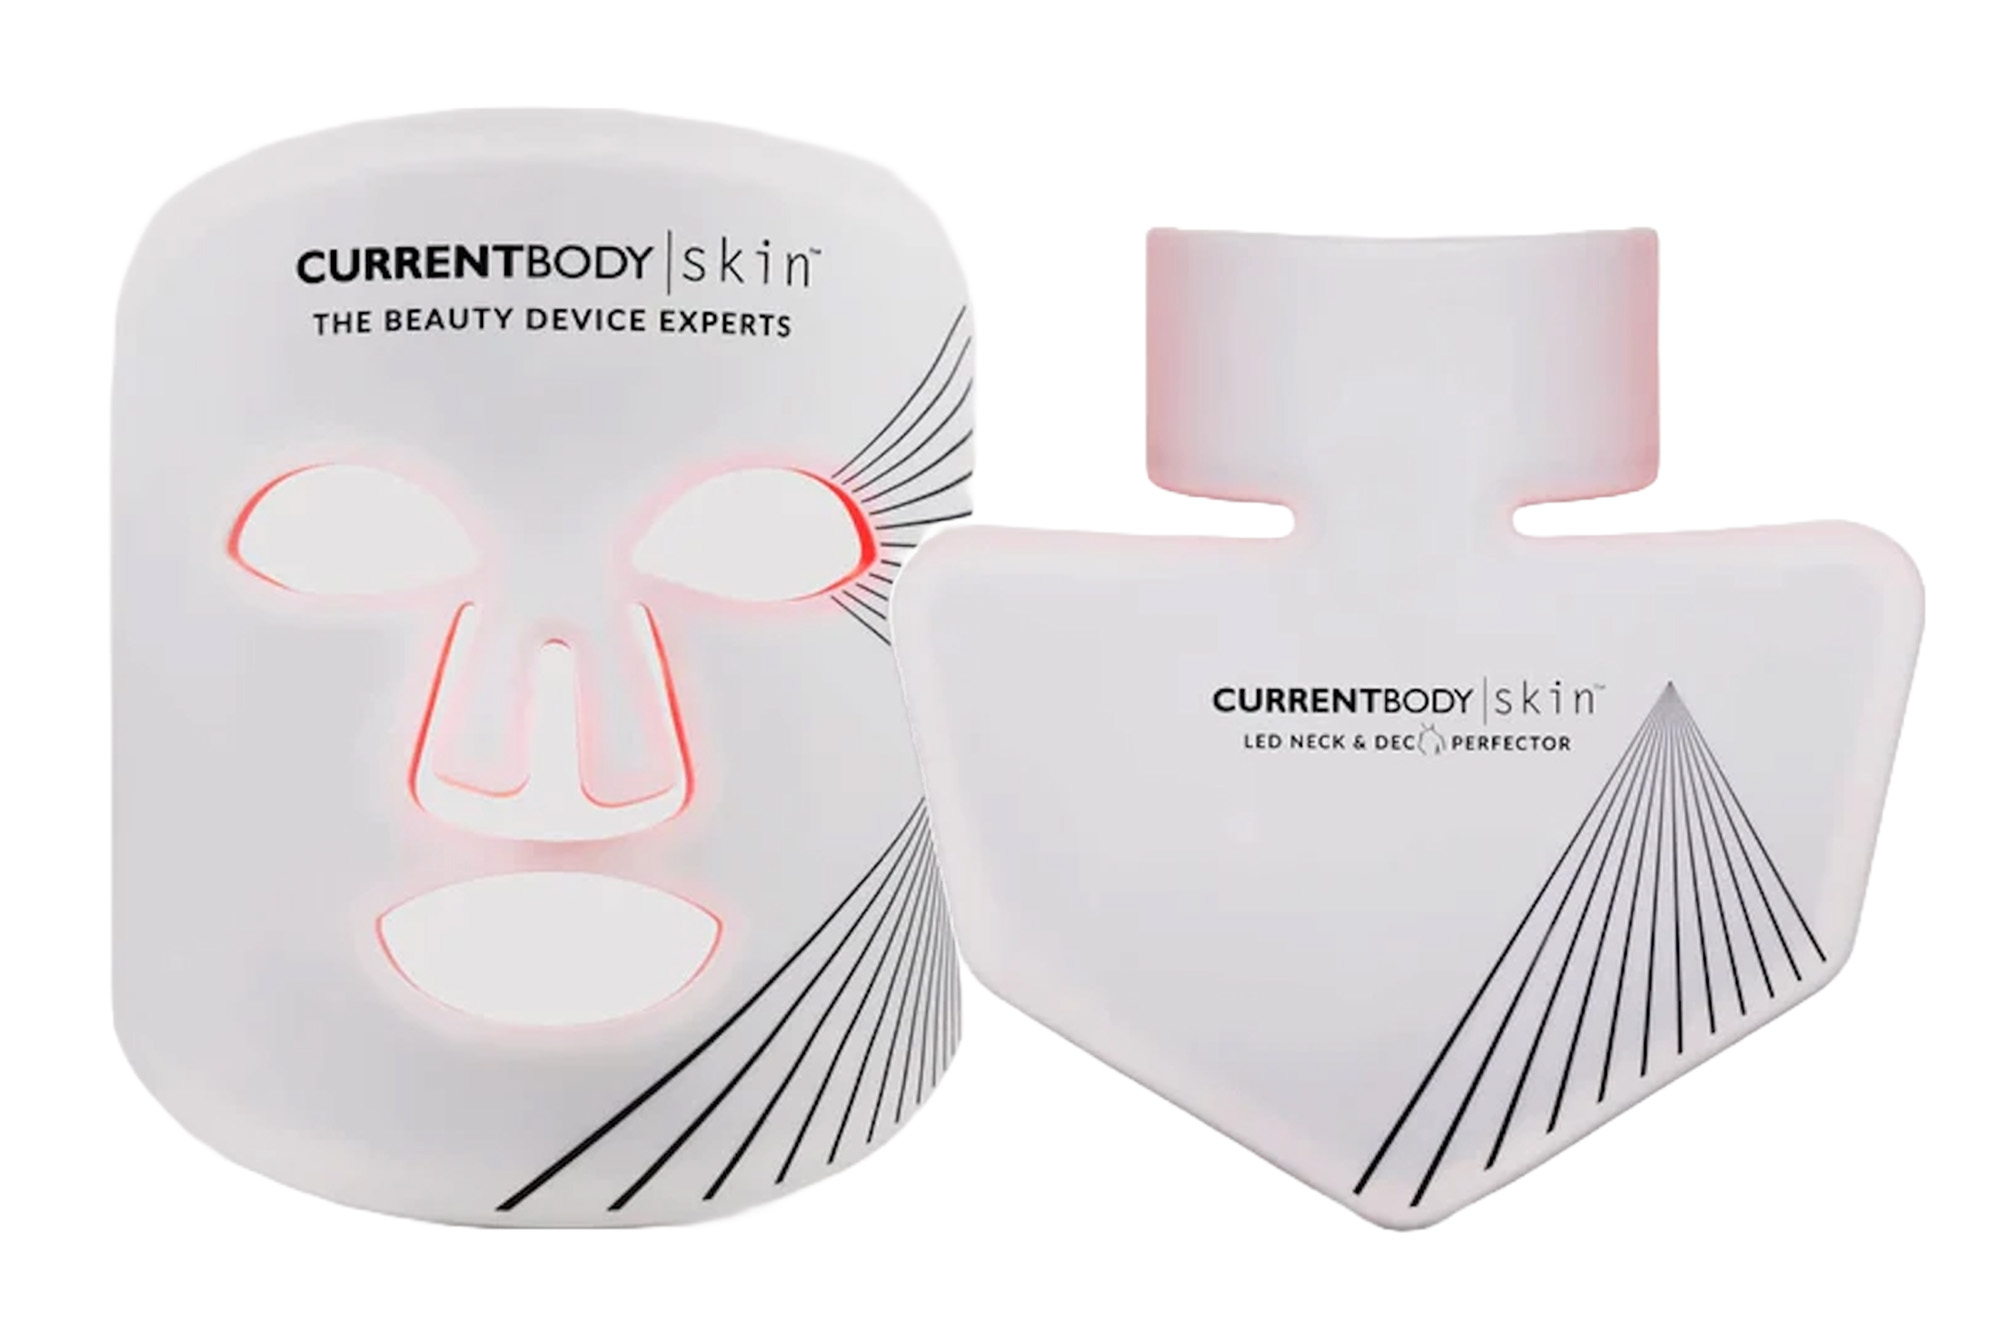 An LED face and neck mask